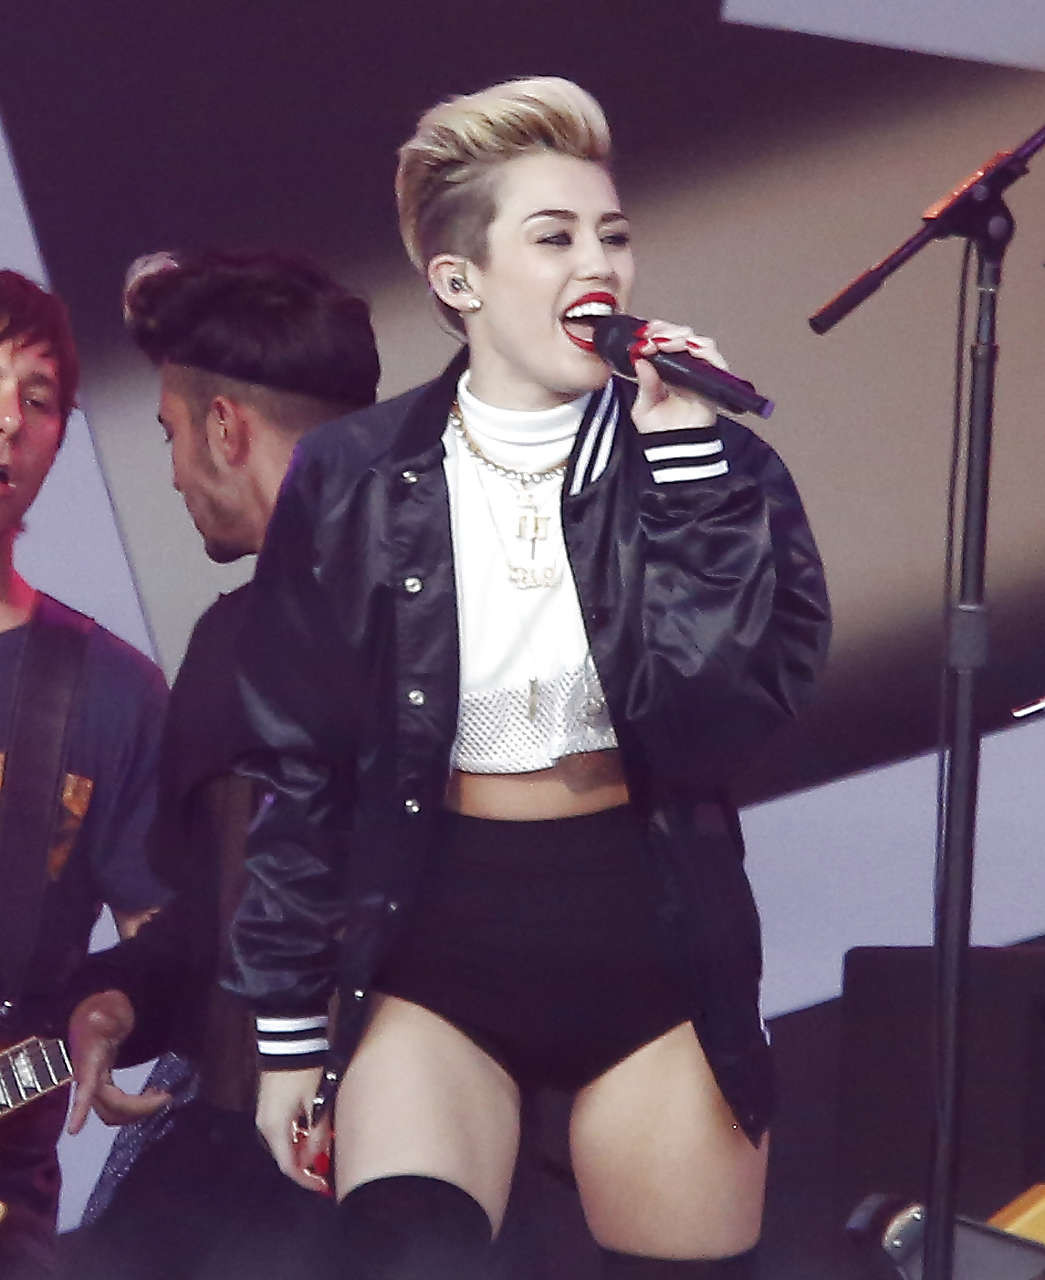 Miley Cyrus showing long legs and nice butt on stage #75226966